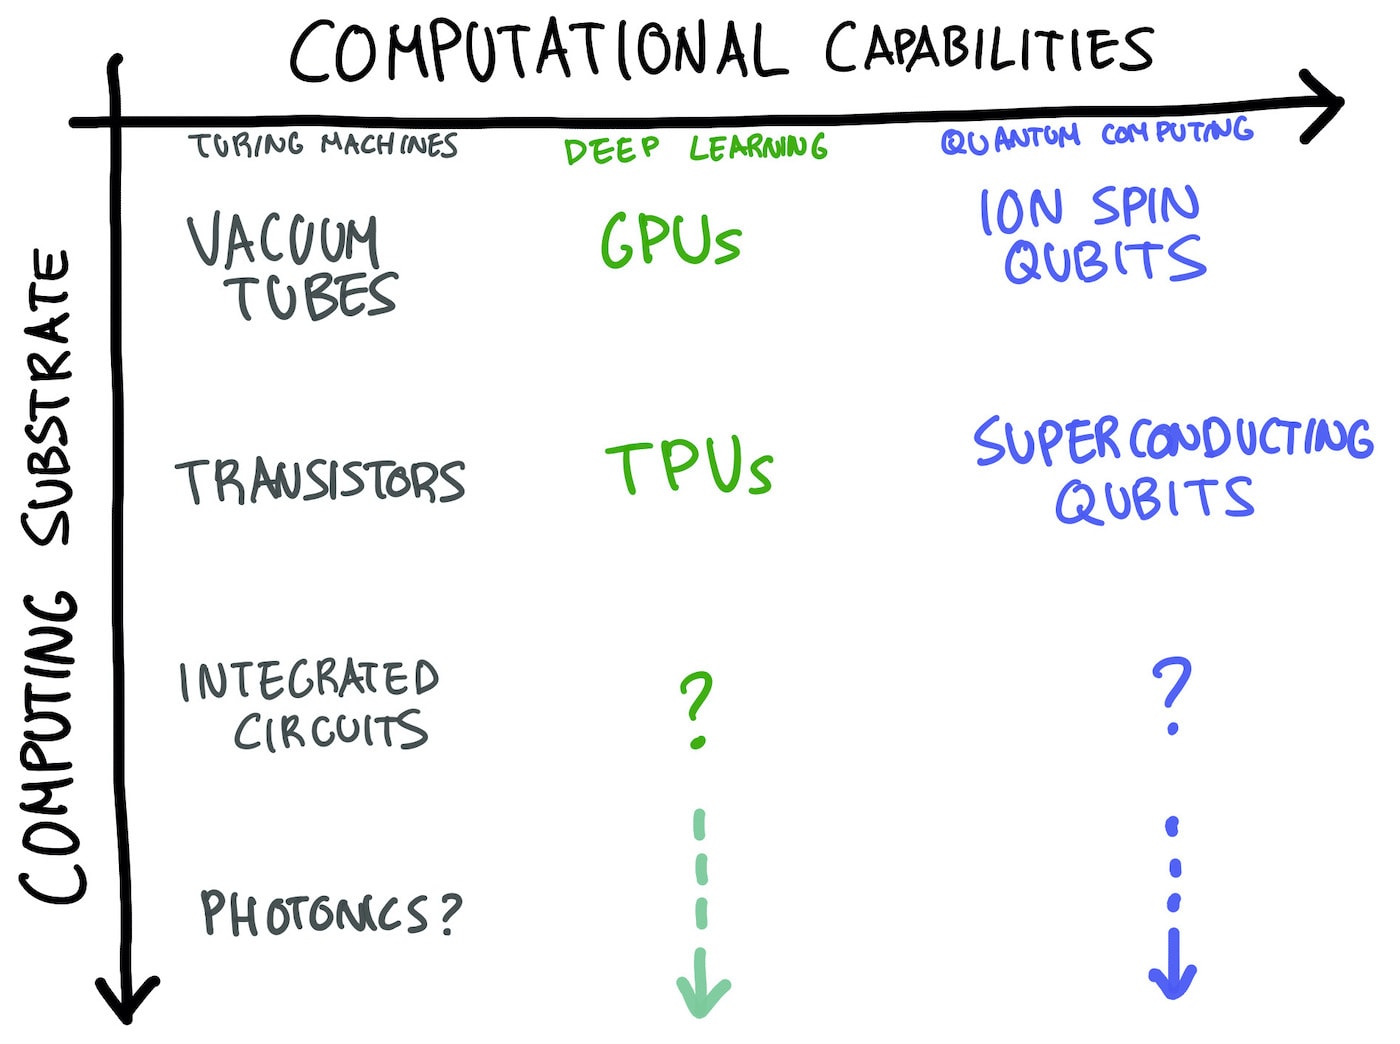 A table of different computational capabilities and the evolution of their respective substrates